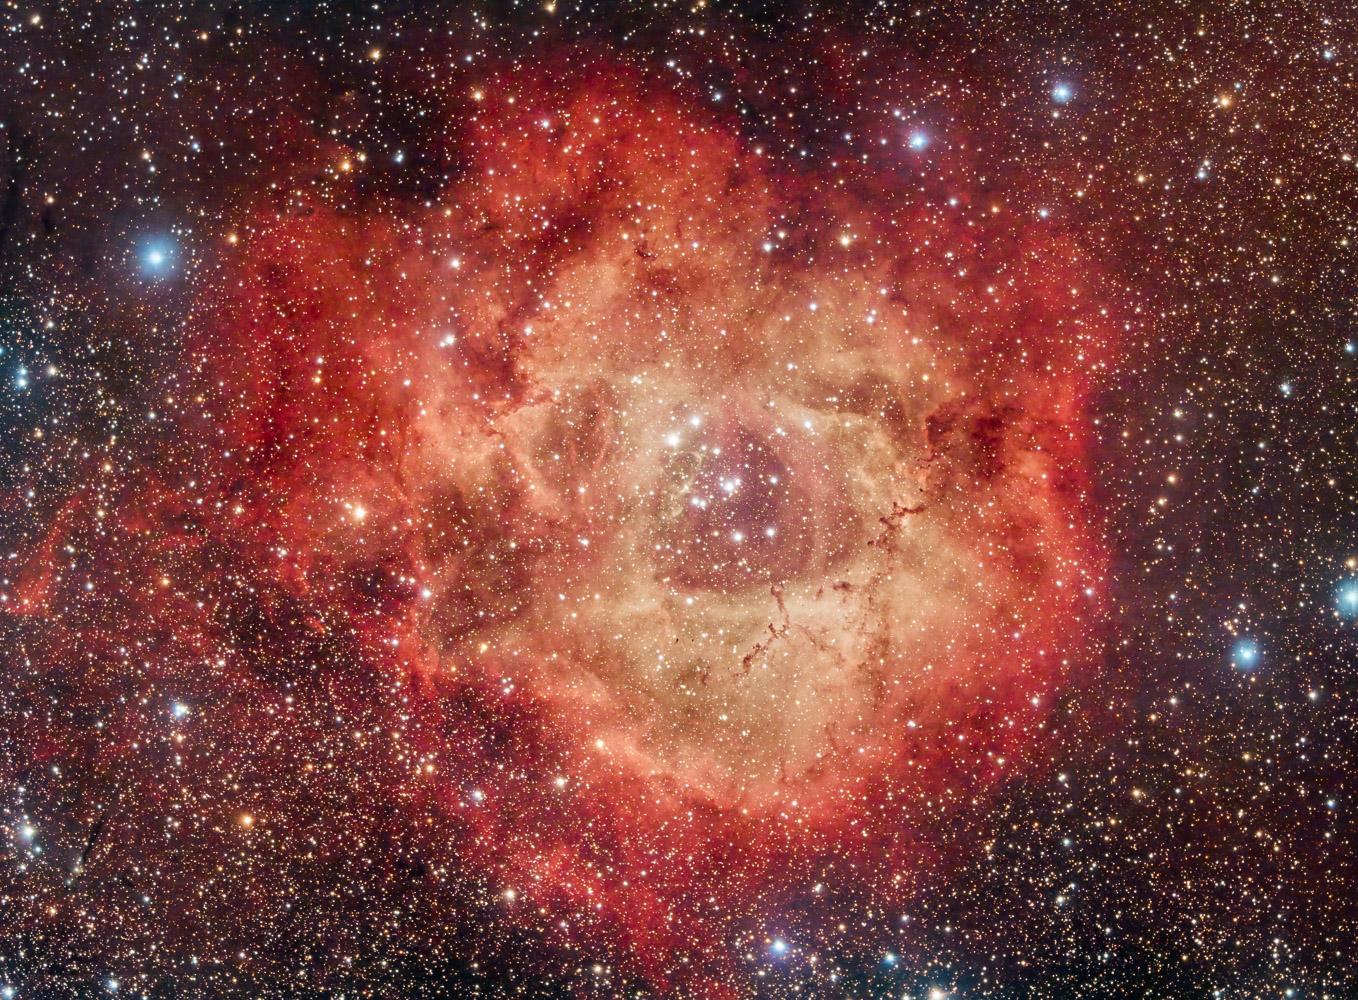 You can buy this  astrophotography of the Rosette Nebula as a Hahnemühle giclee printed fine art poster in A1 or A2 format.